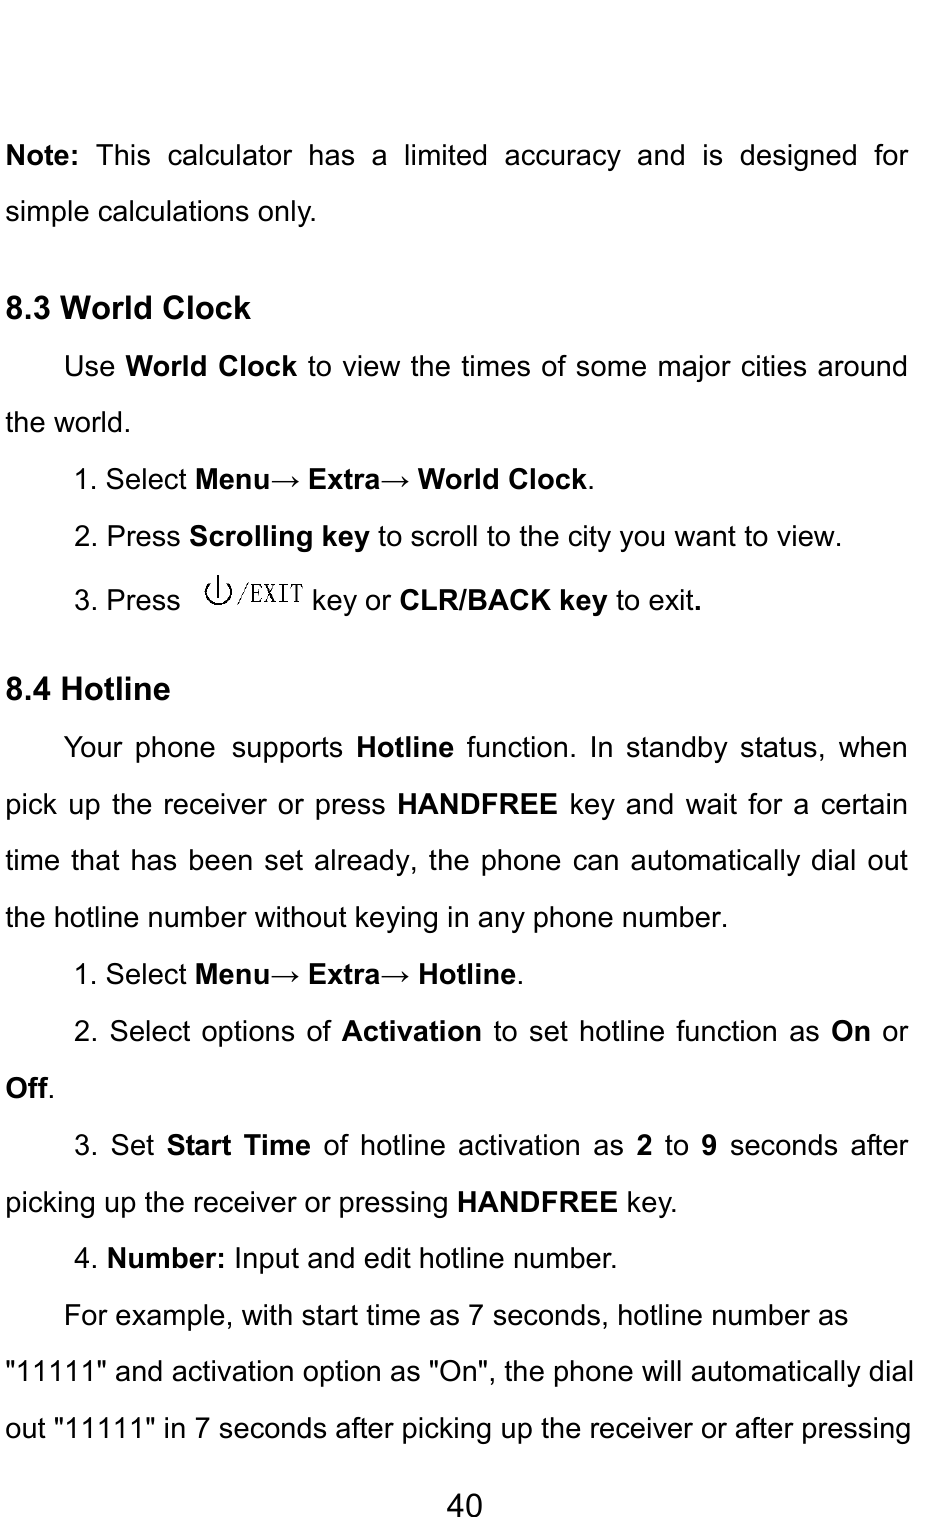                                     40 Note:  This calculator has a limited accuracy and is designed for simple calculations only.   8.3 World Clock Use World Clock to view the times of some major cities around the world. 1. Select Menu→ Extra→ World Clock. 2. Press Scrolling key to scroll to the city you want to view.  3. Press  key or CLR/BACK key to exit.  8.4 Hotline Your phone supports  Hotline function. In standby status, when pick up the receiver or press HANDFREE key and wait for a certain time that has been set already, the phone can automatically dial out the hotline number without keying in any phone number. 1. Select Menu→ Extra→ Hotline. 2. Select options of Activation to set hotline function as On or Off. 3. Set  Start Time of hotline activation as 2 to 9 seconds after picking up the receiver or pressing HANDFREE key.   4. Number: Input and edit hotline number. For example, with start time as 7 seconds, hotline number as &quot;11111&quot; and activation option as &quot;On&quot;, the phone will automatically dial out &quot;11111&quot; in 7 seconds after picking up the receiver or after pressing 